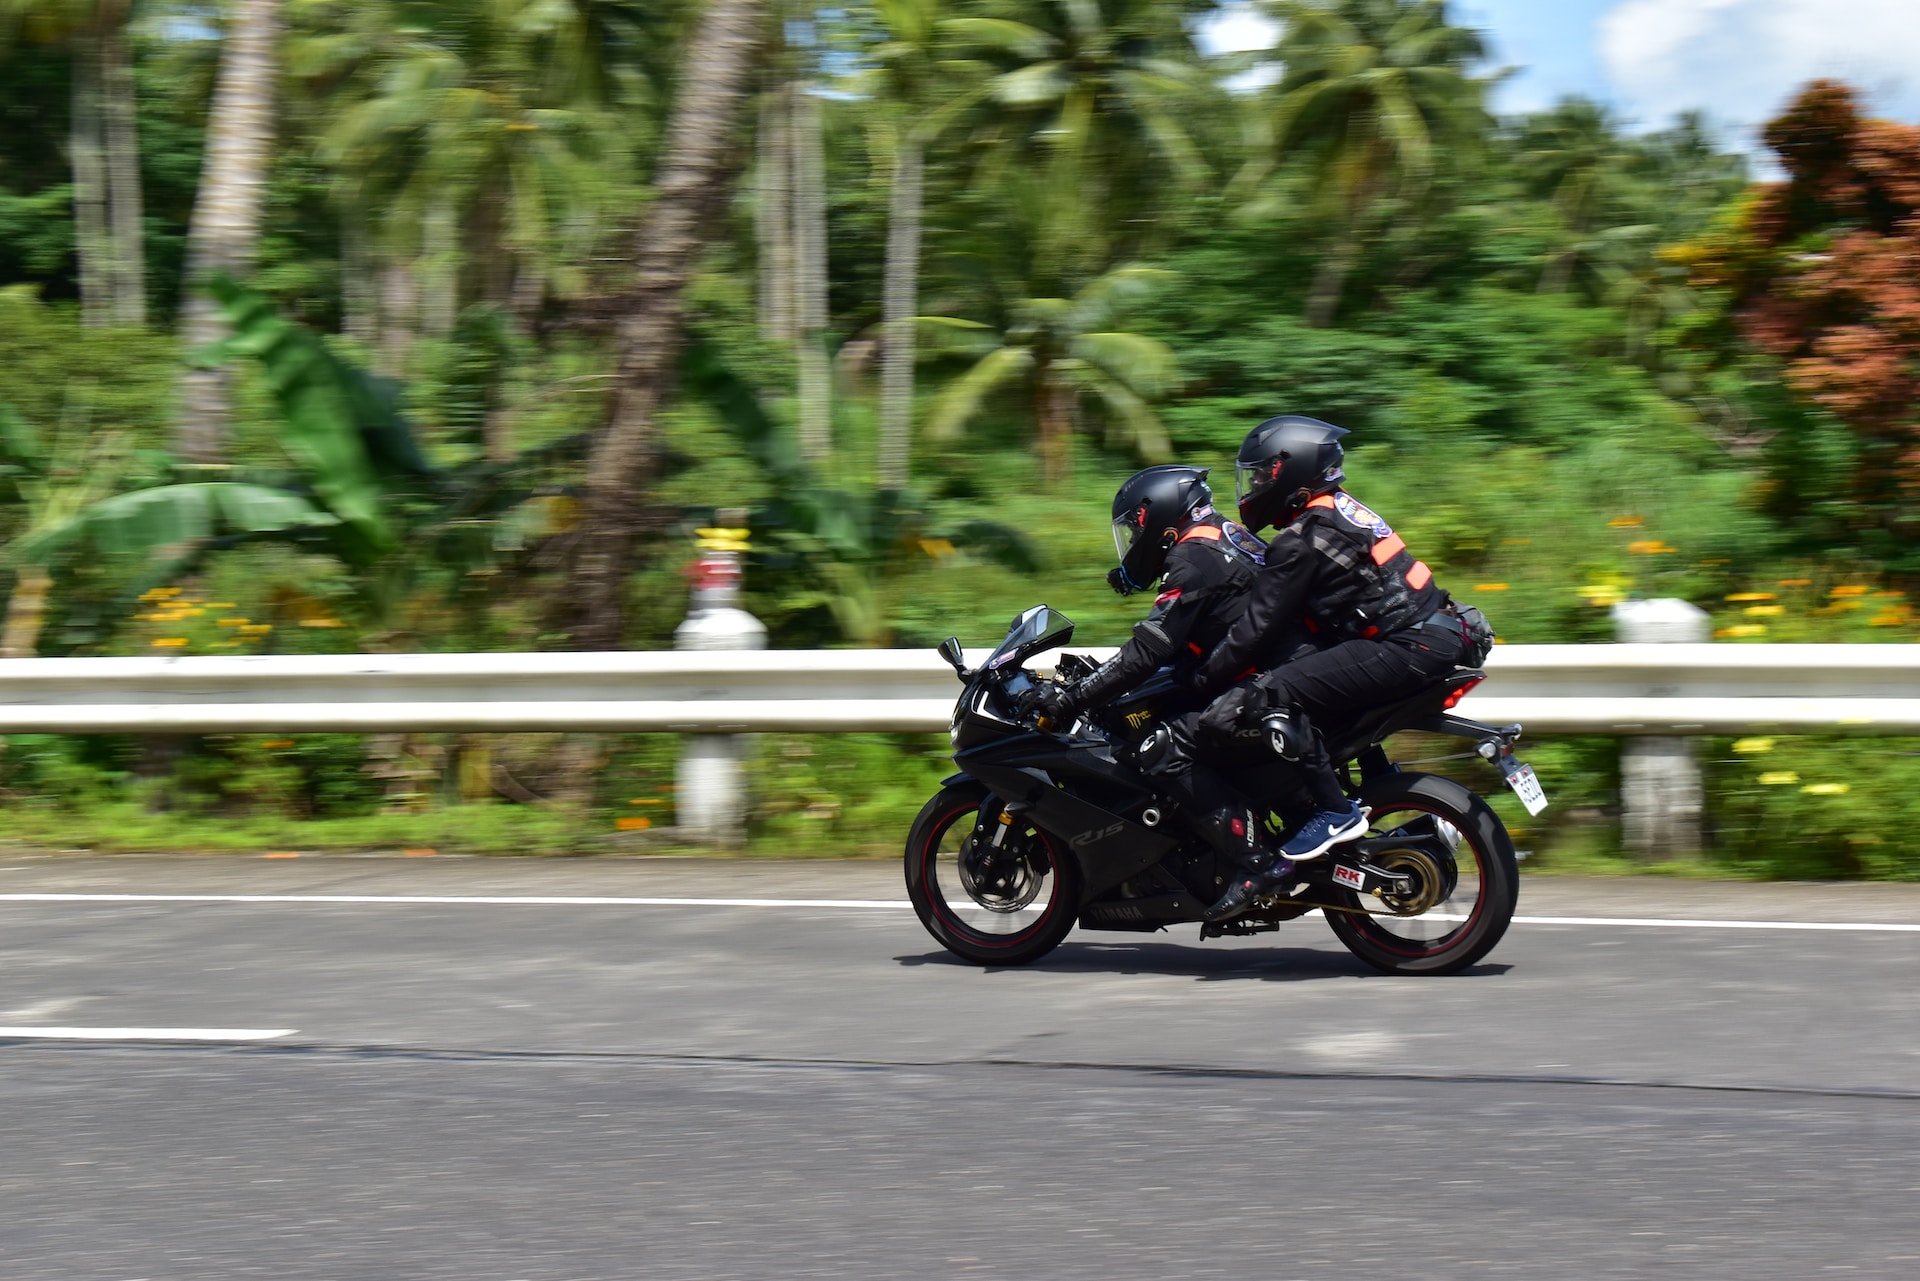 Motorcycle Rentals in Bangkok: The Adventure on Two Wheels